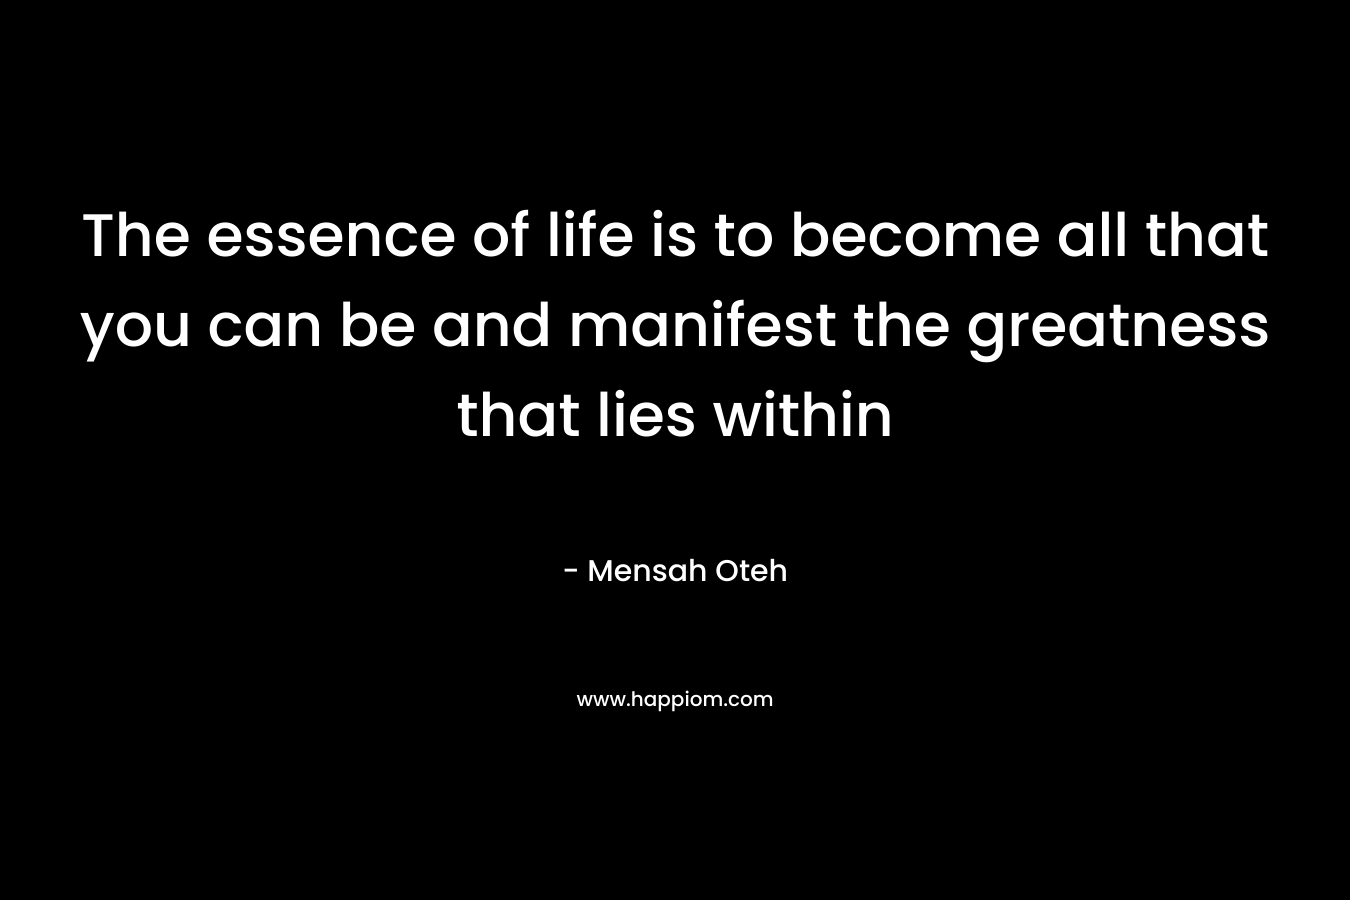 The essence of life is to become all that you can be and manifest the greatness that lies within